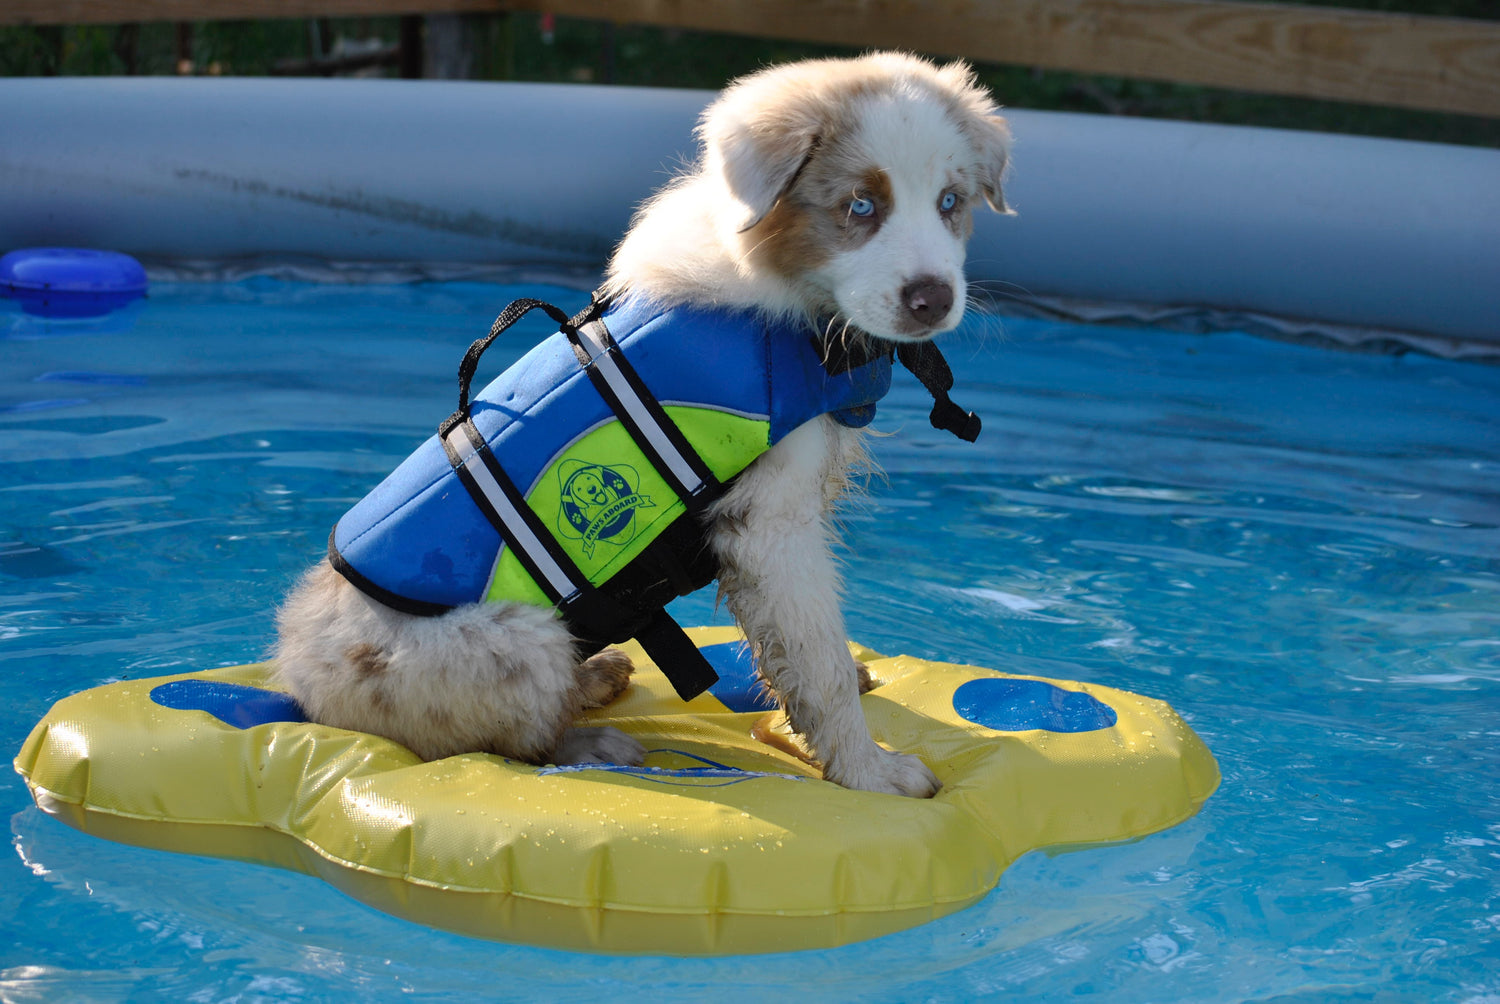 Australian Shepherd puppy in Paws Aboard dog life jacket on one of Fido Pet Products yellow and blue dog pool floats in swimming pool with pretty blue water.